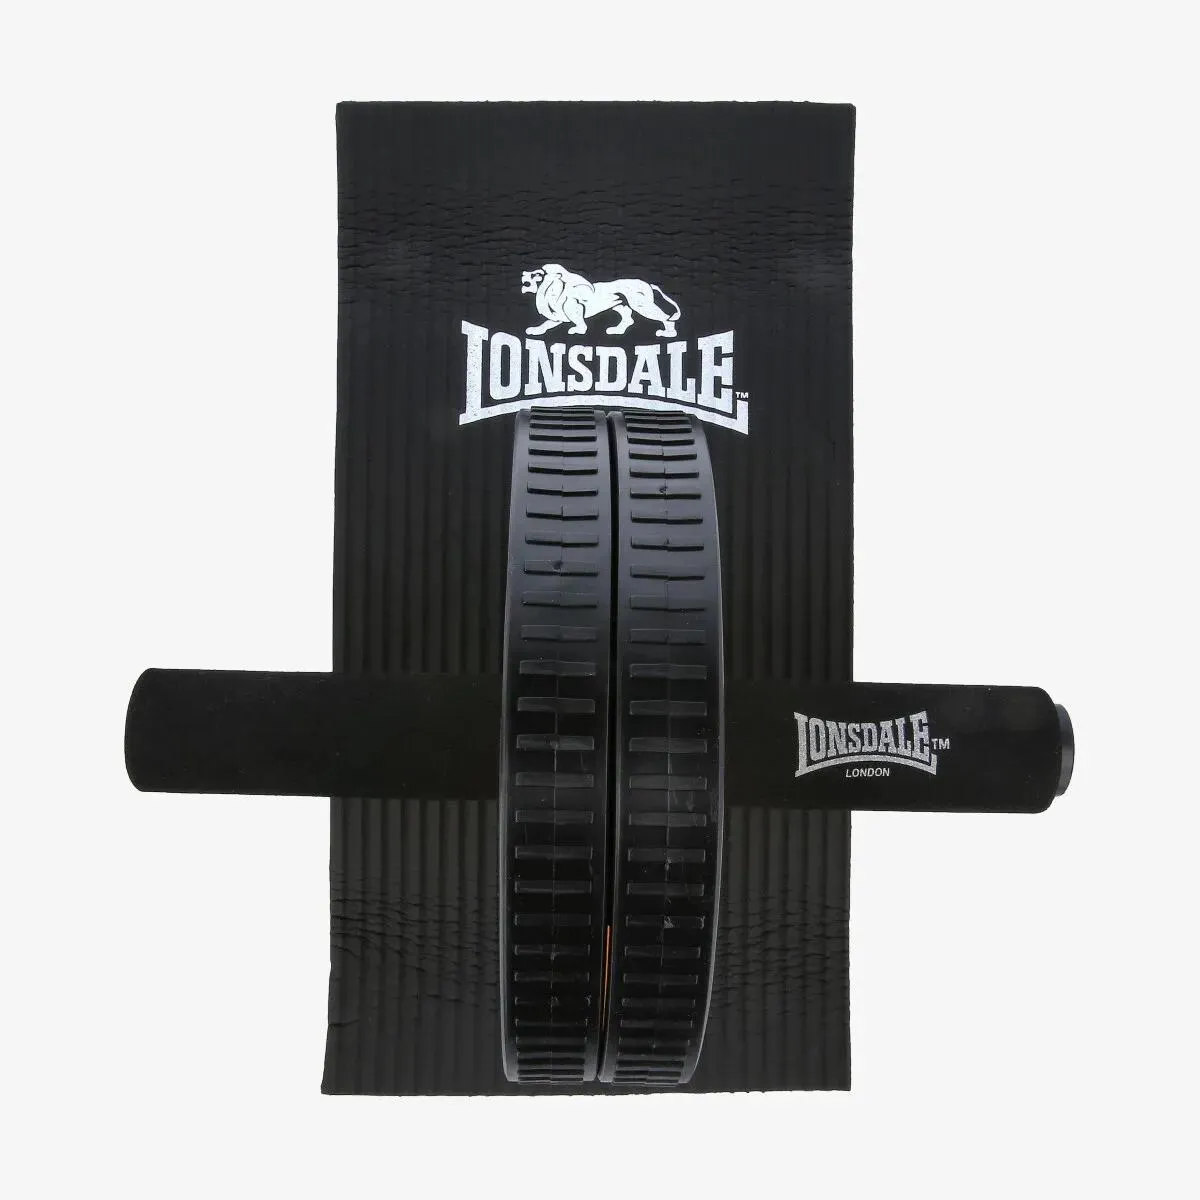 Lonsdale Fitness oprema DOUBLE EXERCISE WHEEL<br />
& KNEE PAD 